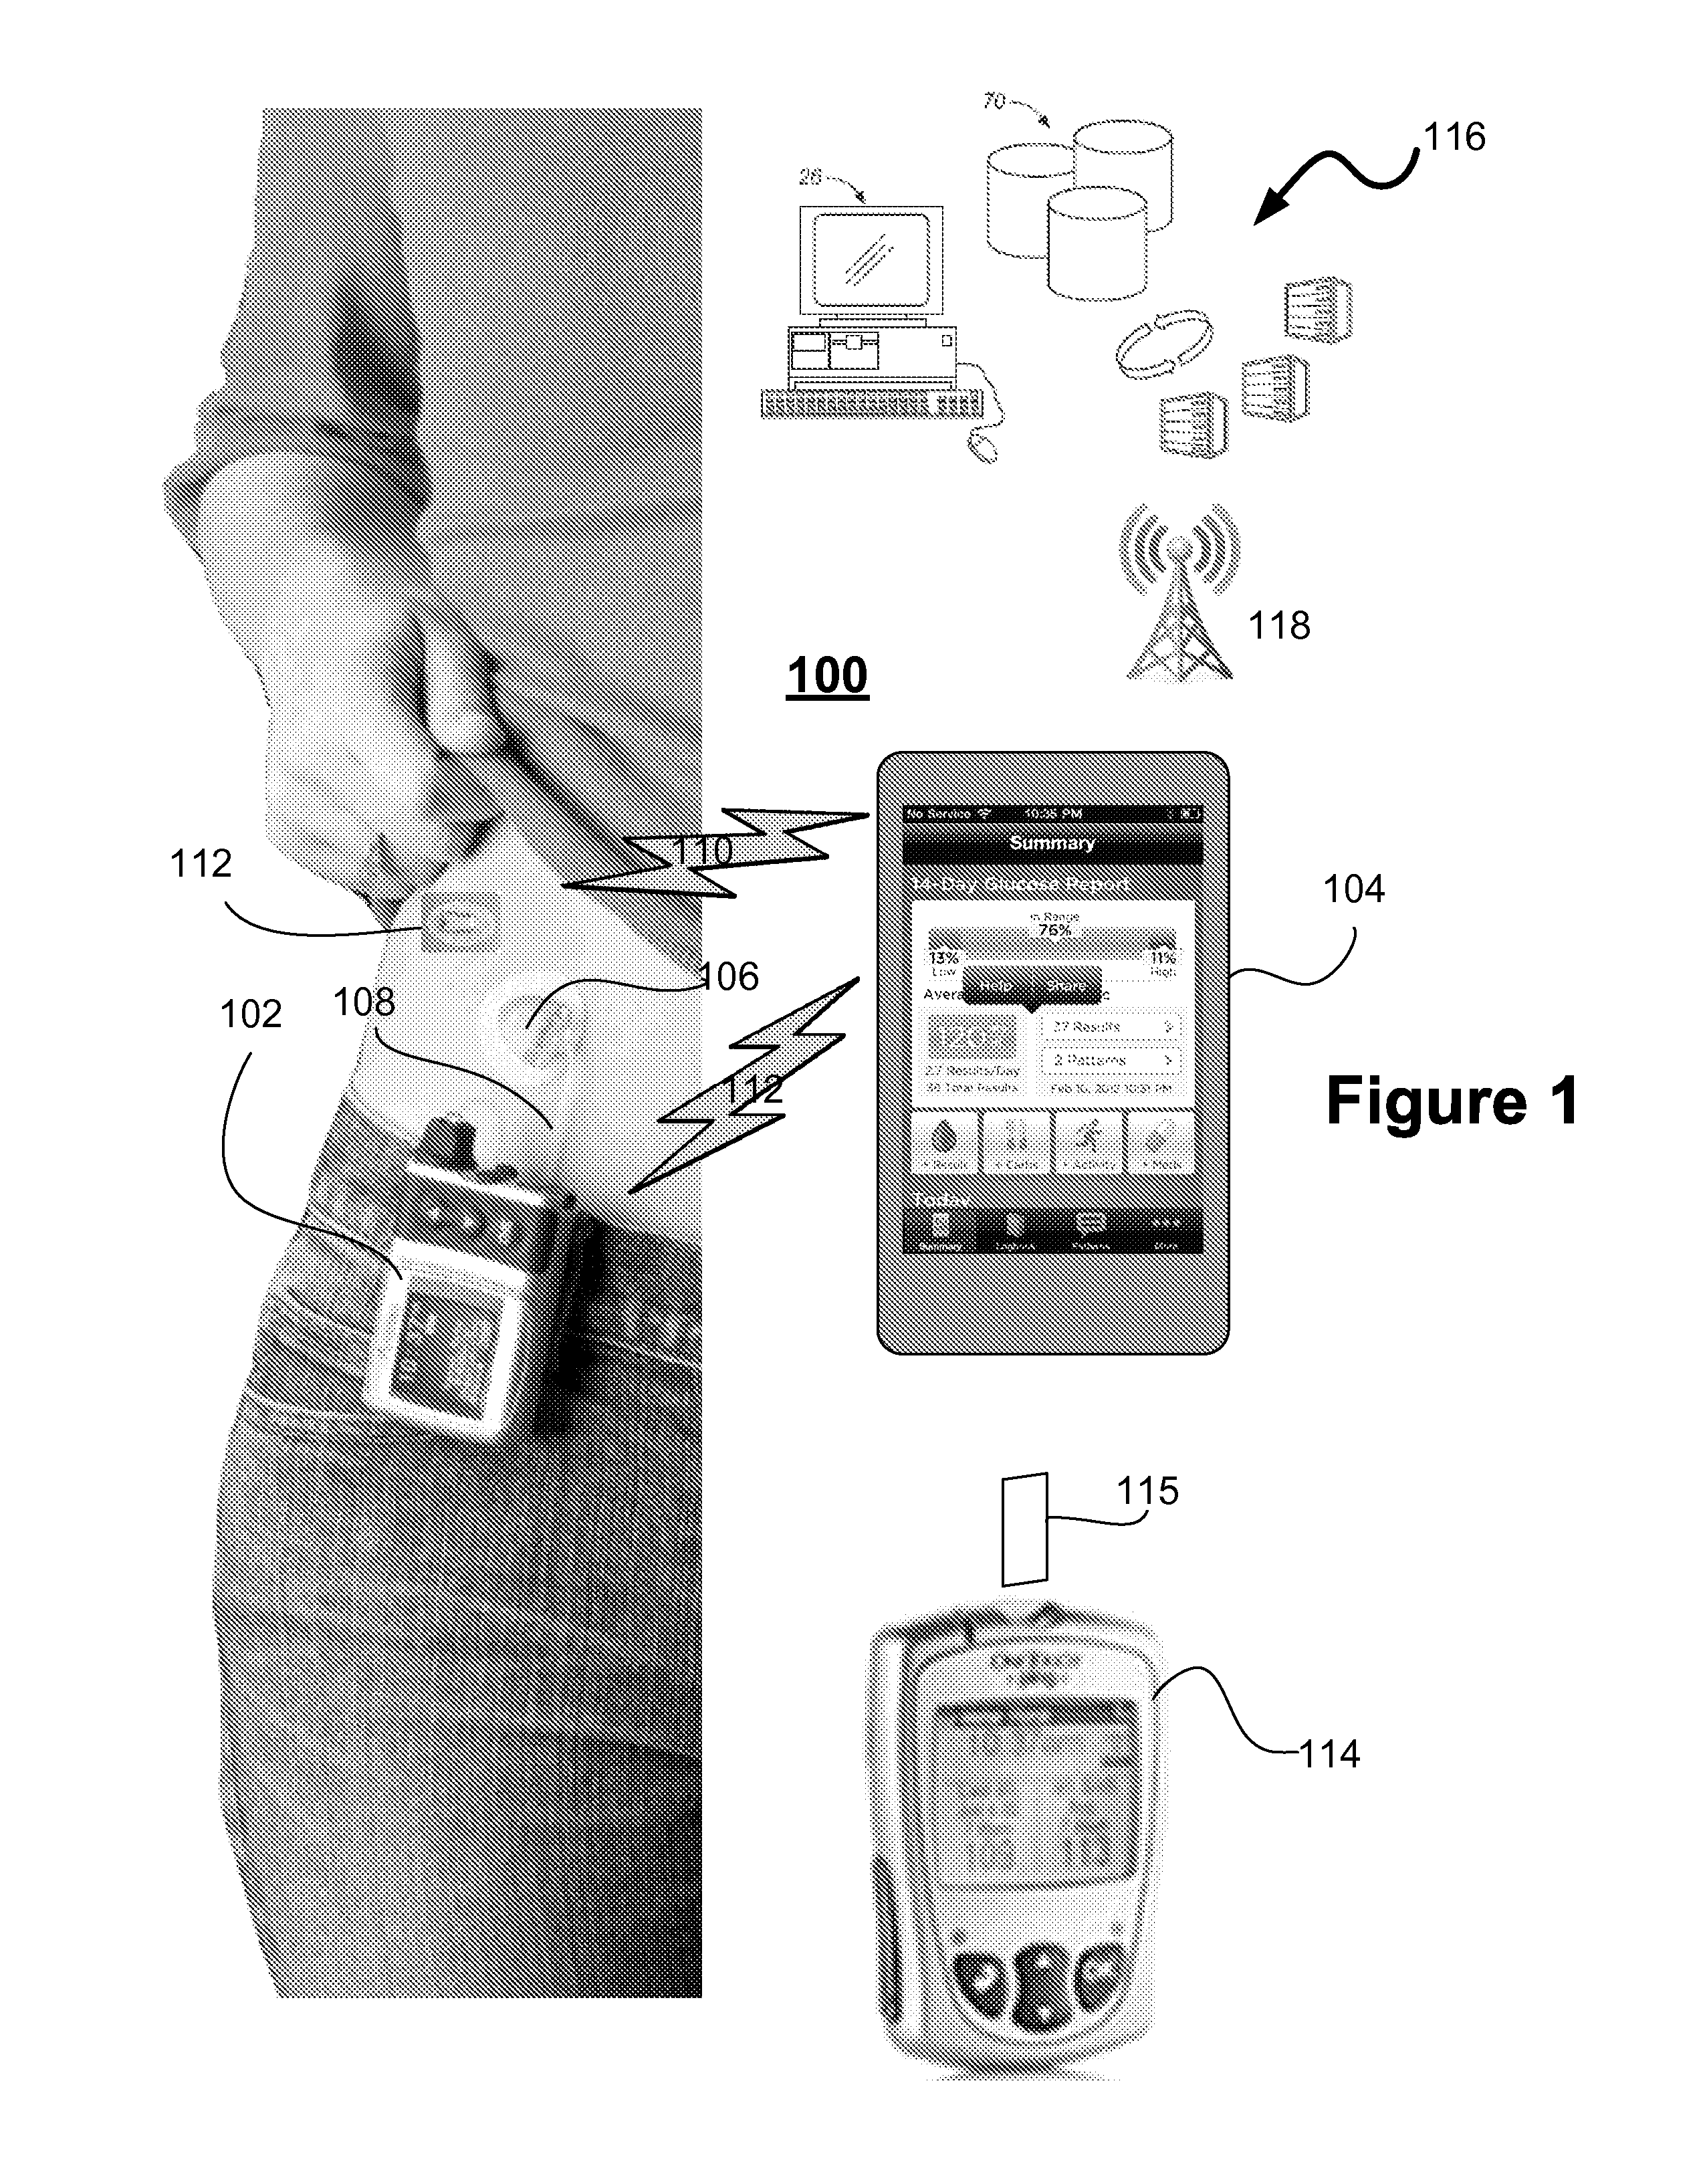 Method and system to derive multiple glycemic patterns from glucose measurements during time of the day